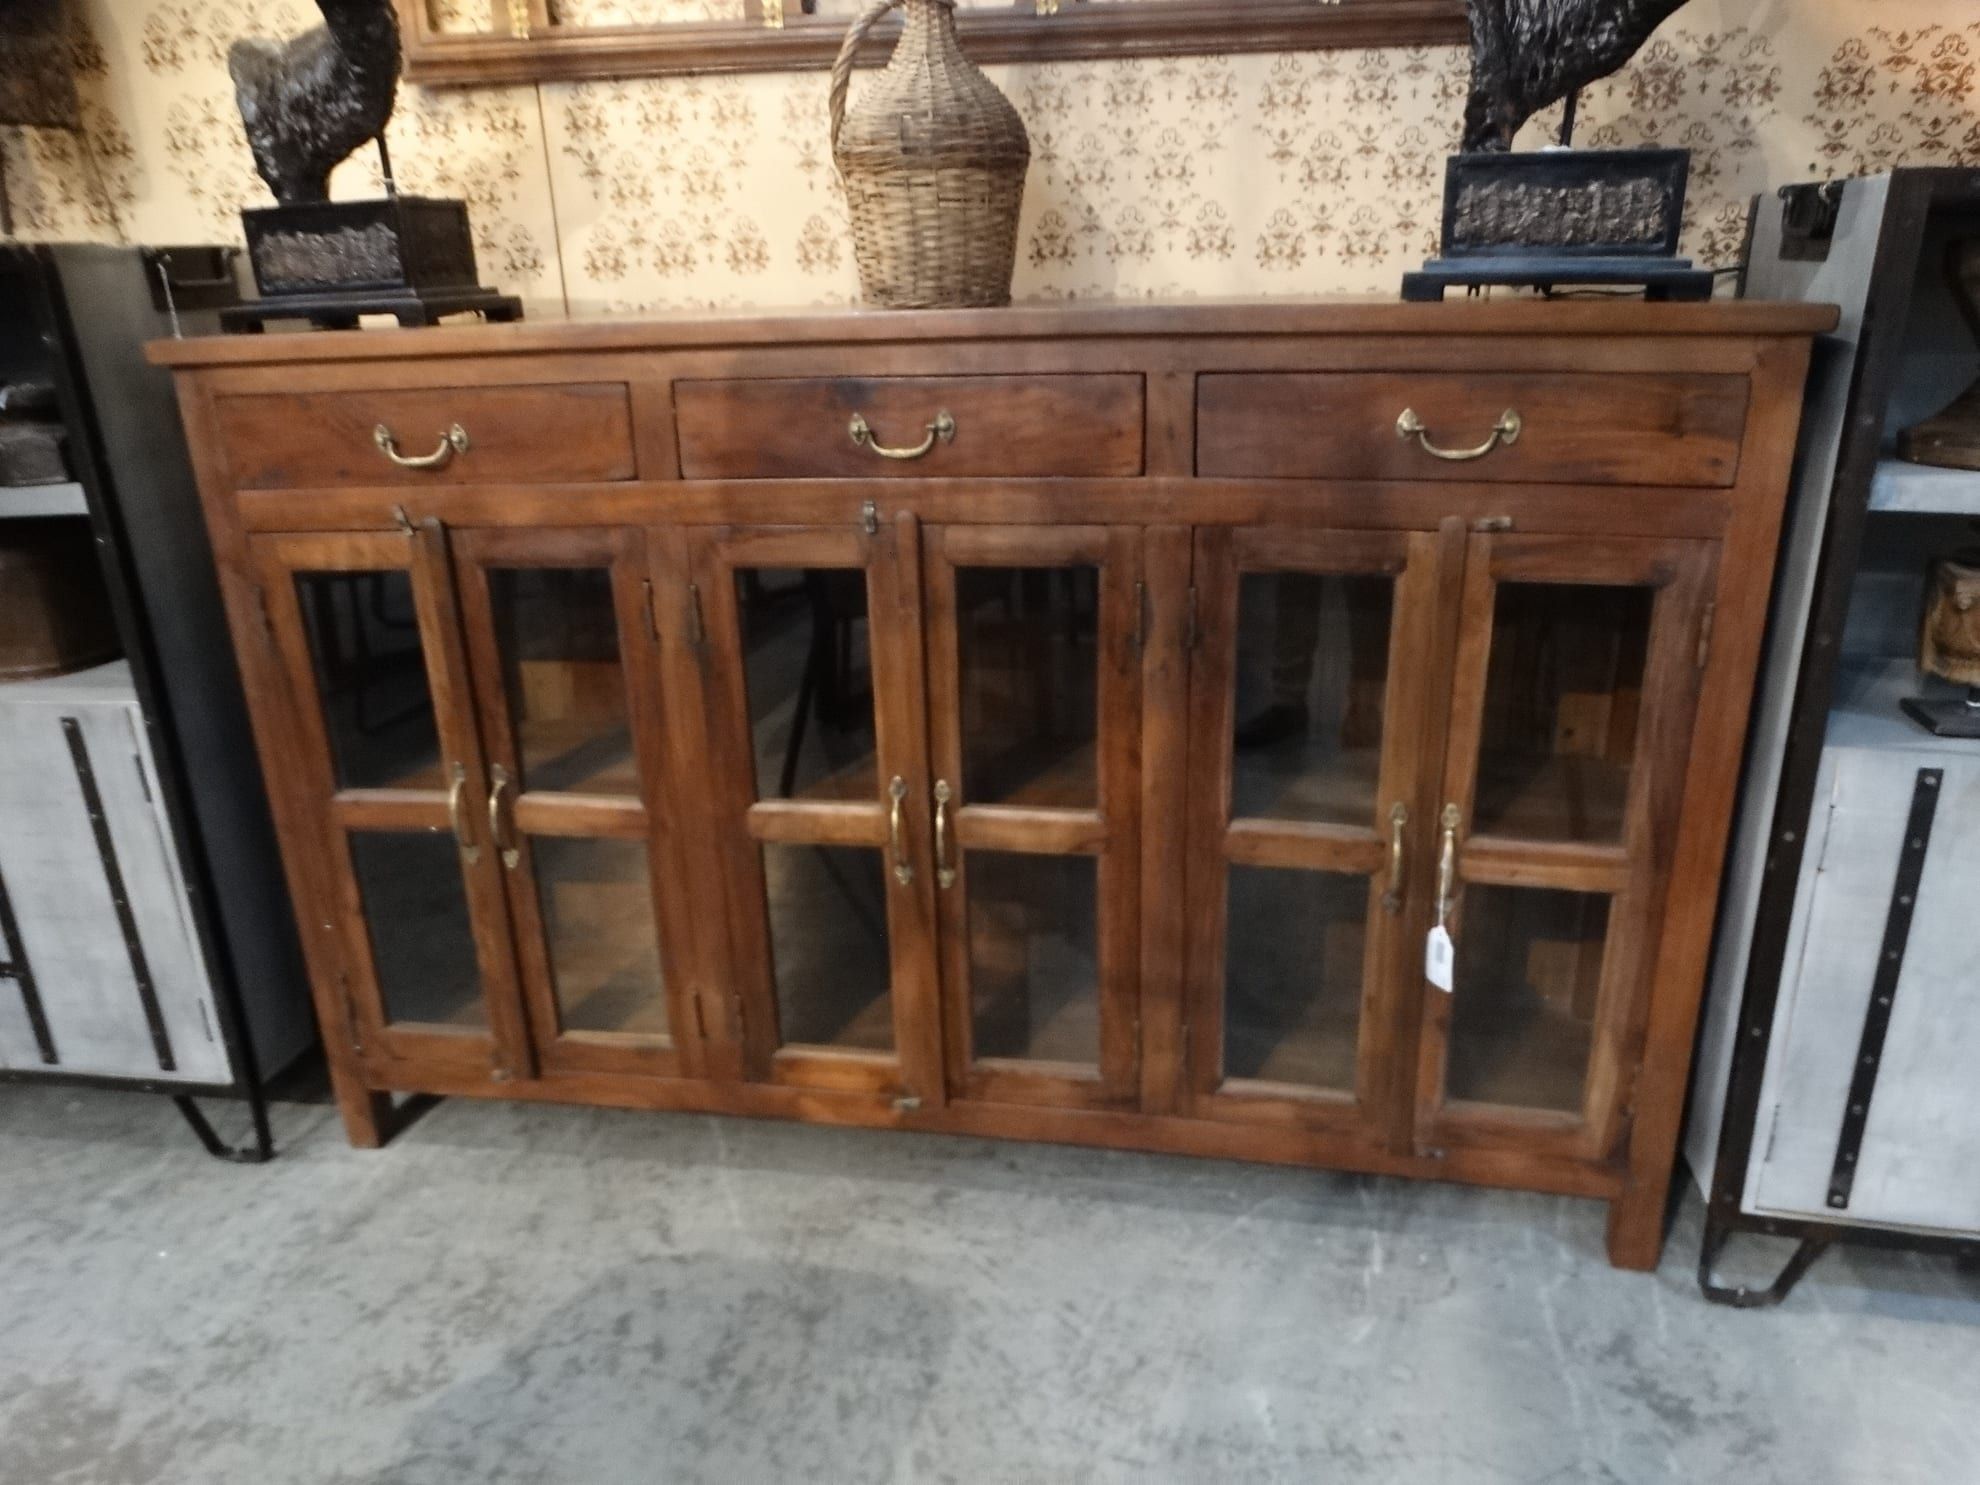 Buy Stackable Sideboard Buffet Storage Cabinet Online In Latest Antique Storage Sideboards With Doors (View 12 of 15)